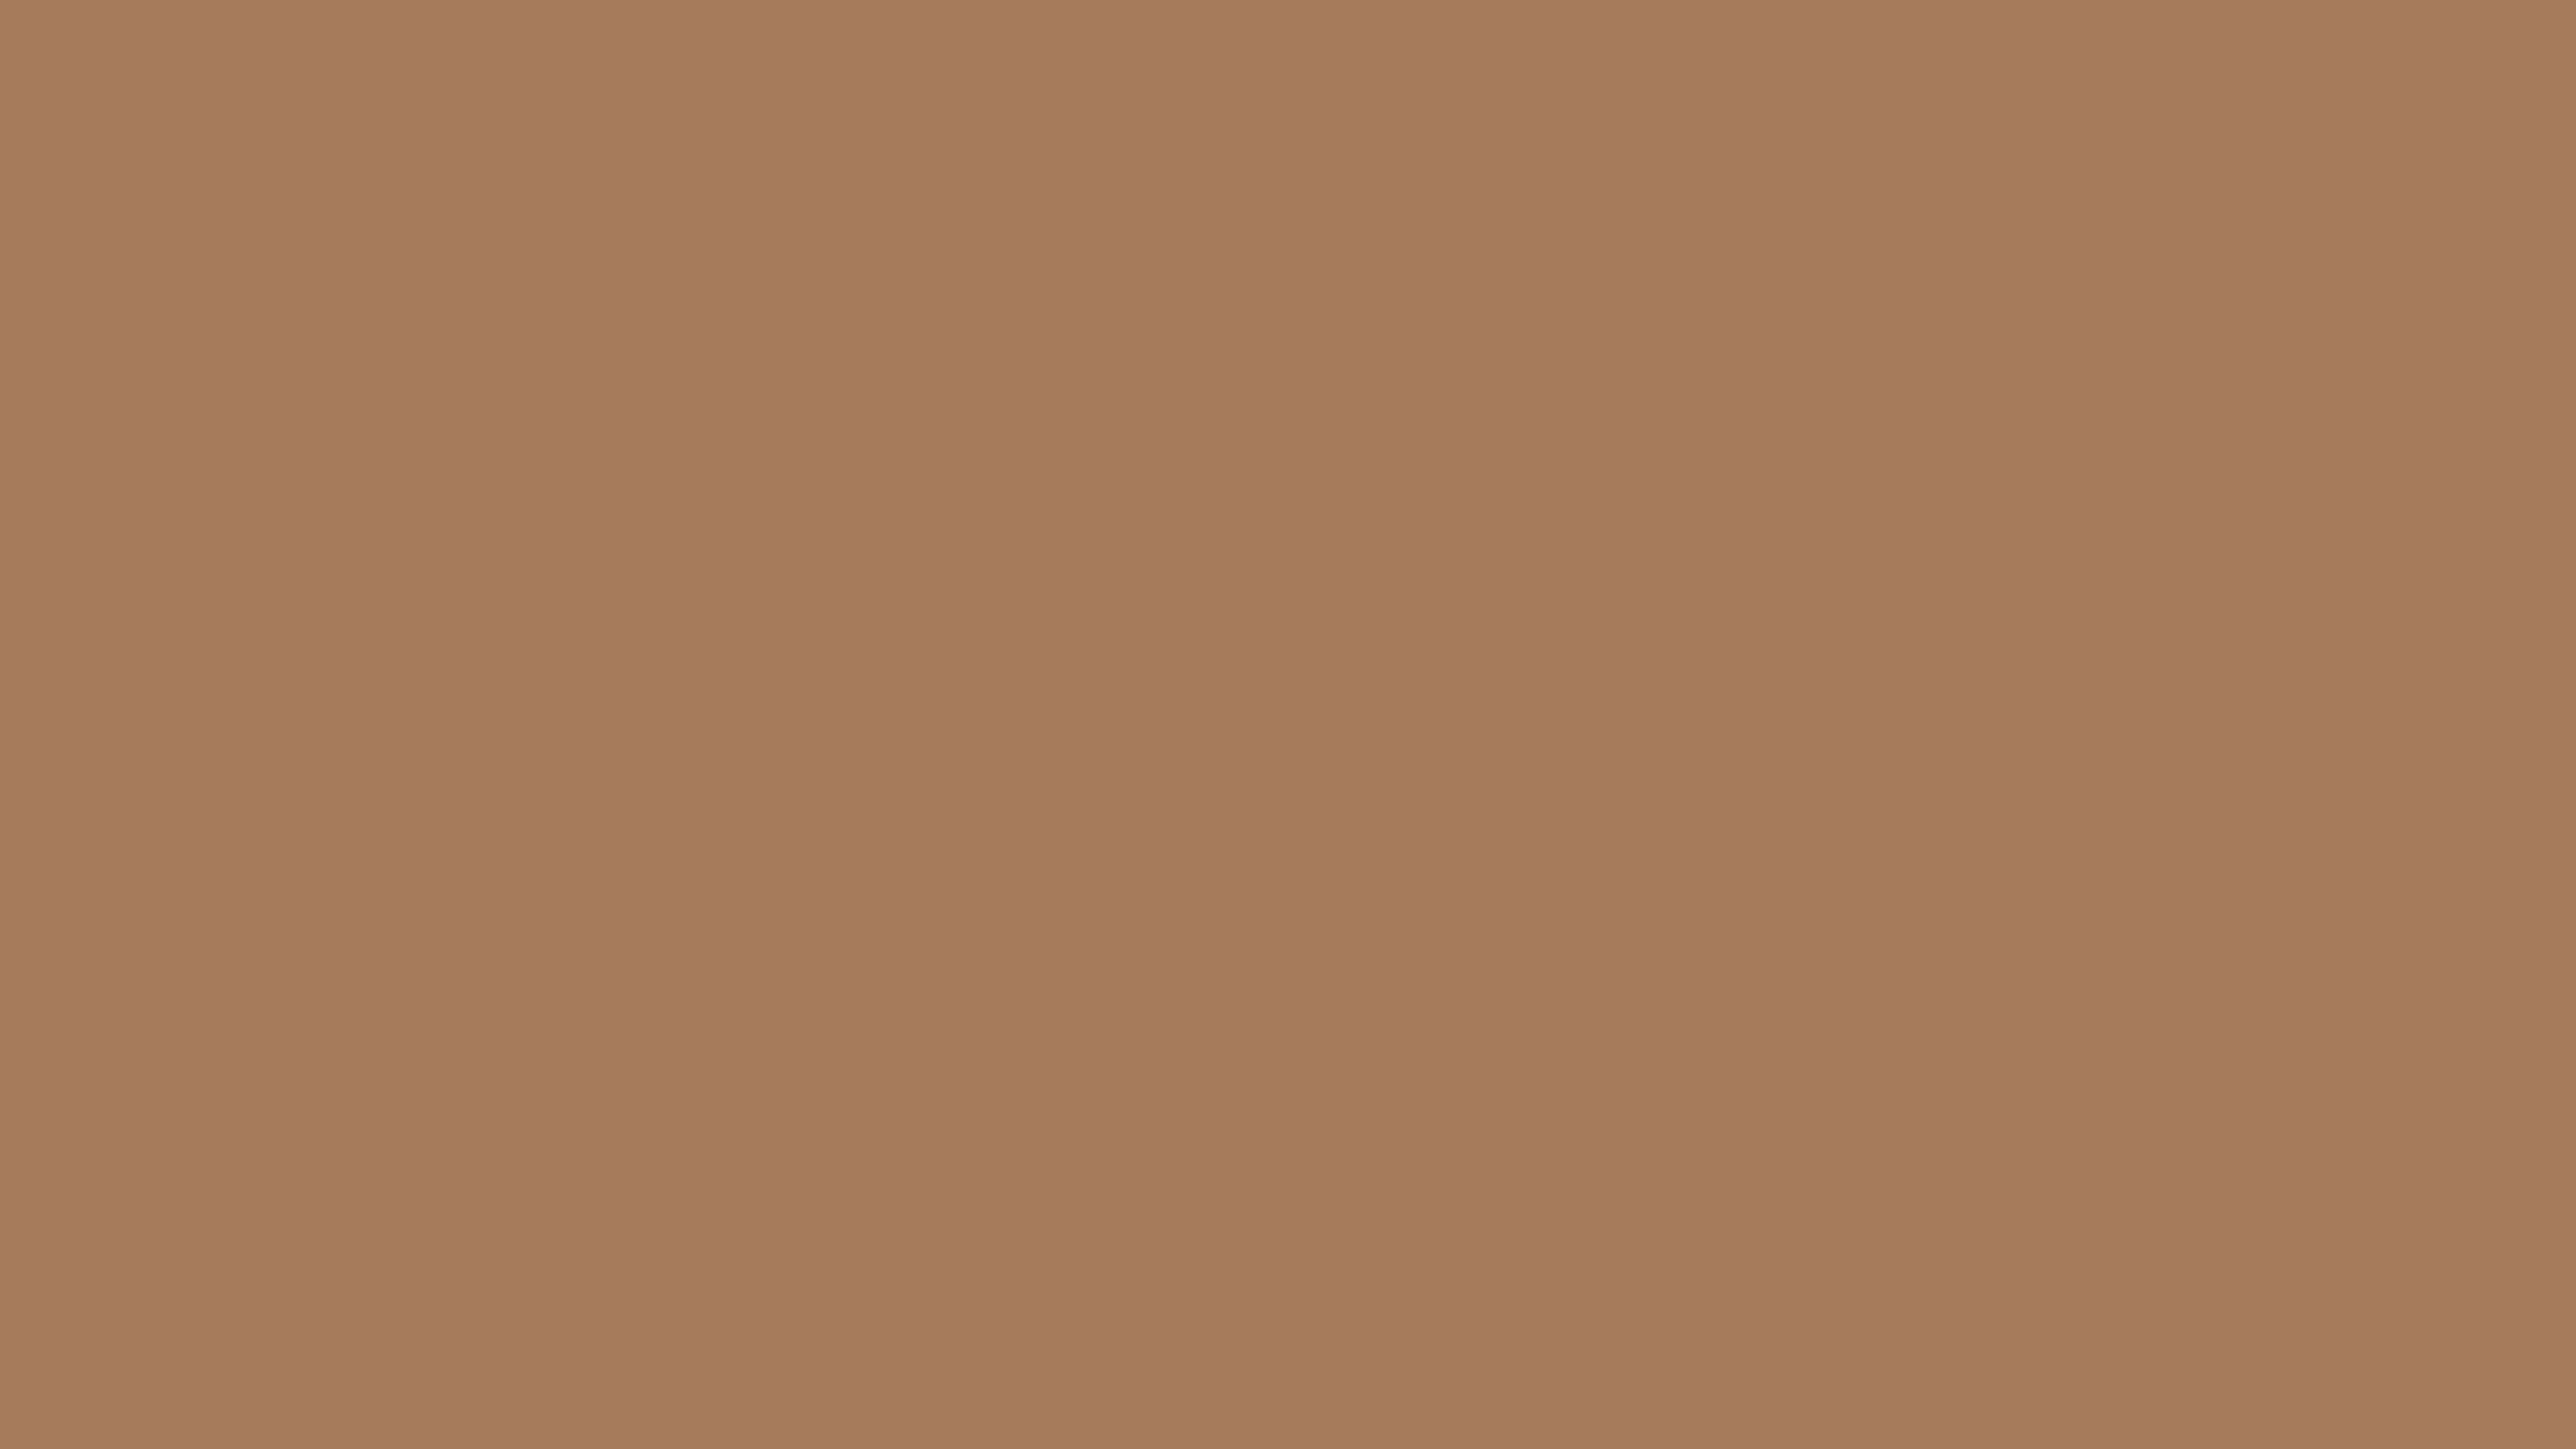 4096x2304 Tuscan Tan Solid Color Background